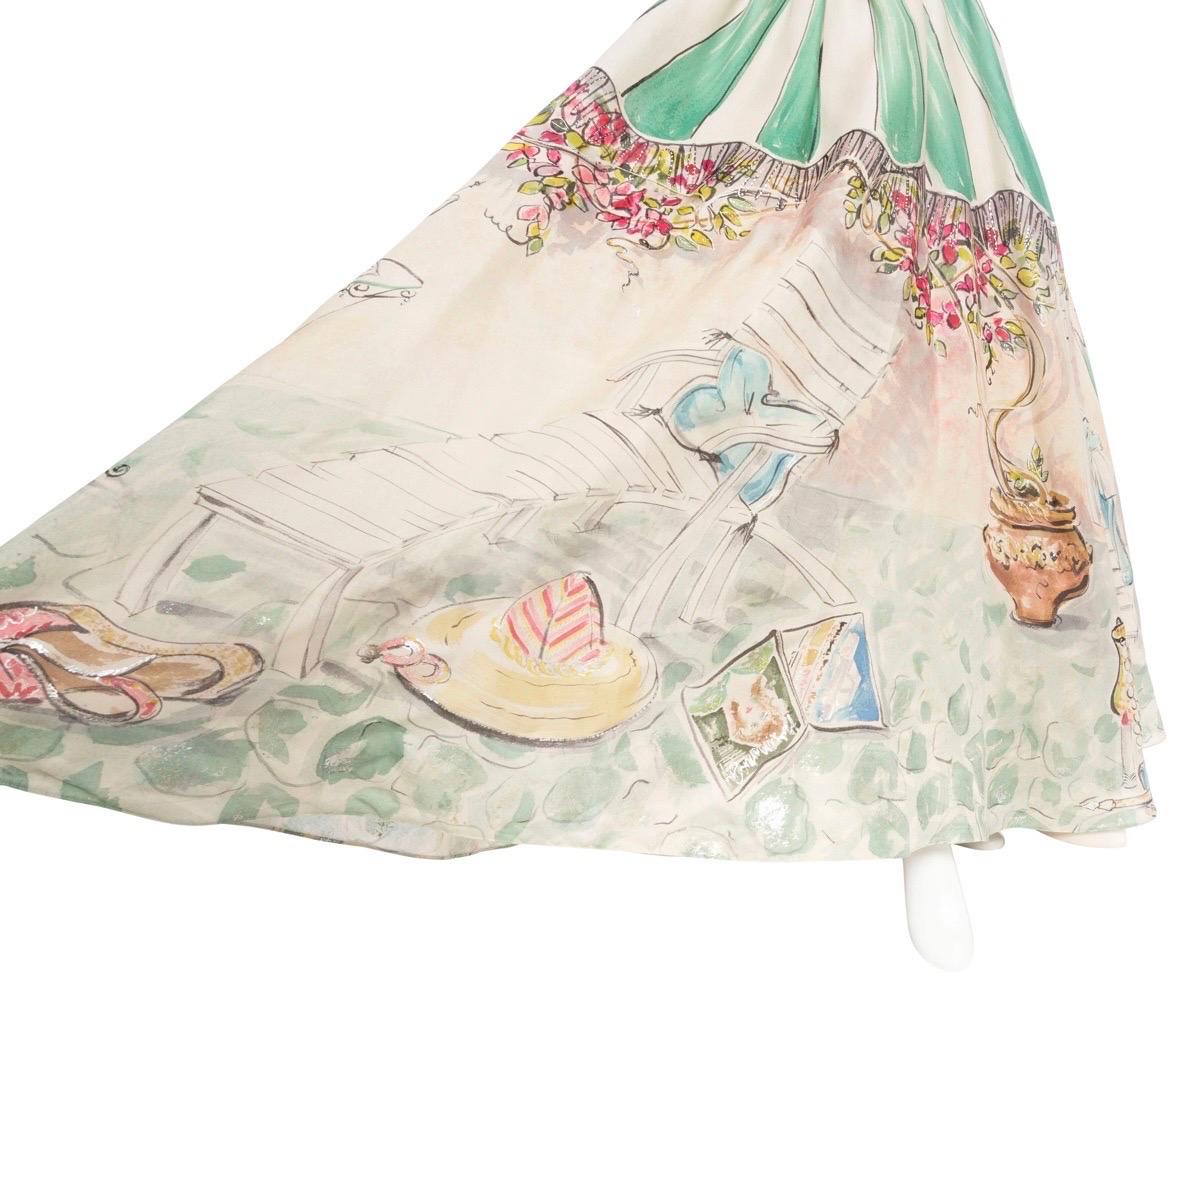 Perry Ellis 1992 Hand-Painted Cotton Organdy Full Skirt (Marc Jacobs) For Sale 1